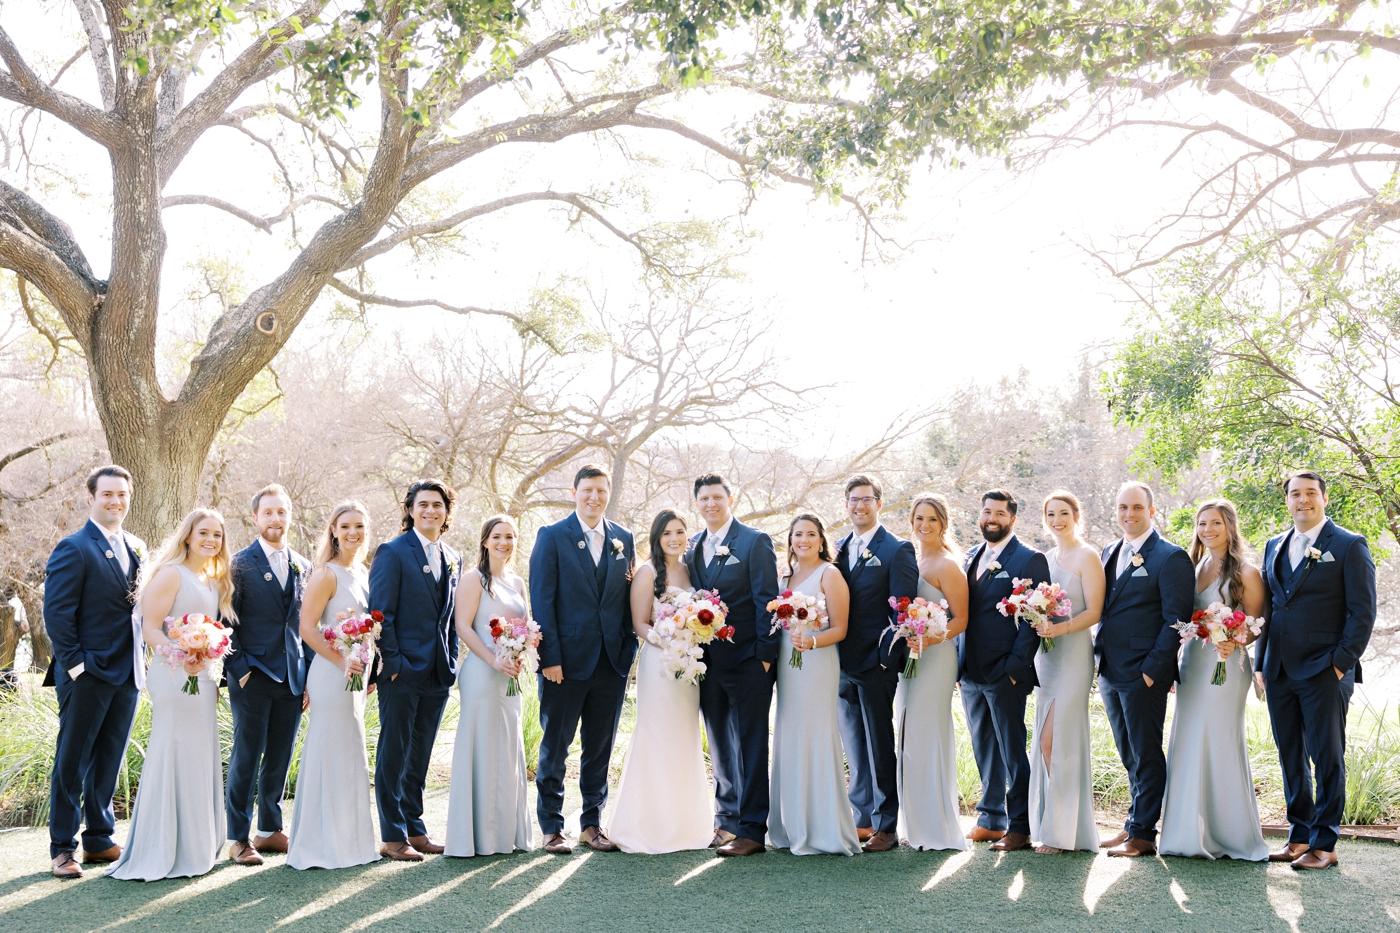 Dusty blue bridesmaids dresses and groomsmen in blue suits